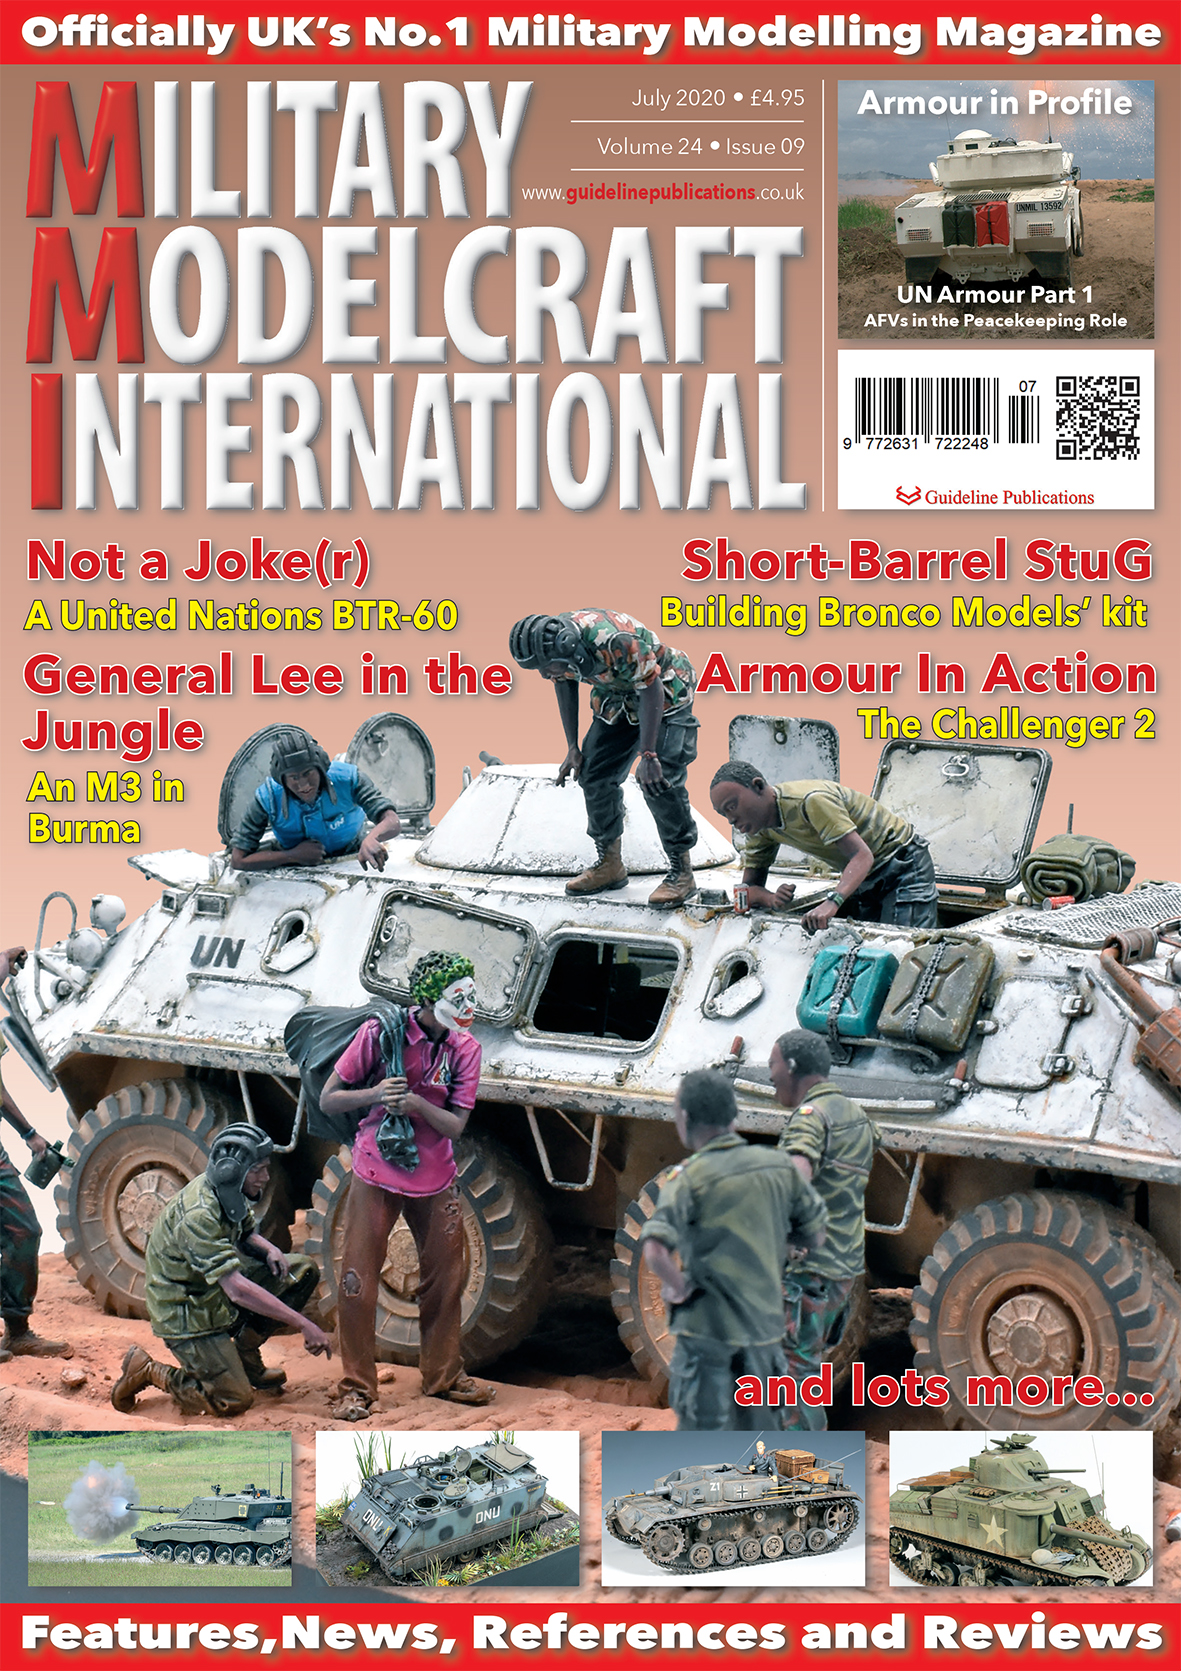 Guideline Publications Military Modelcraft Int July 20 vol 24-009 July 20 